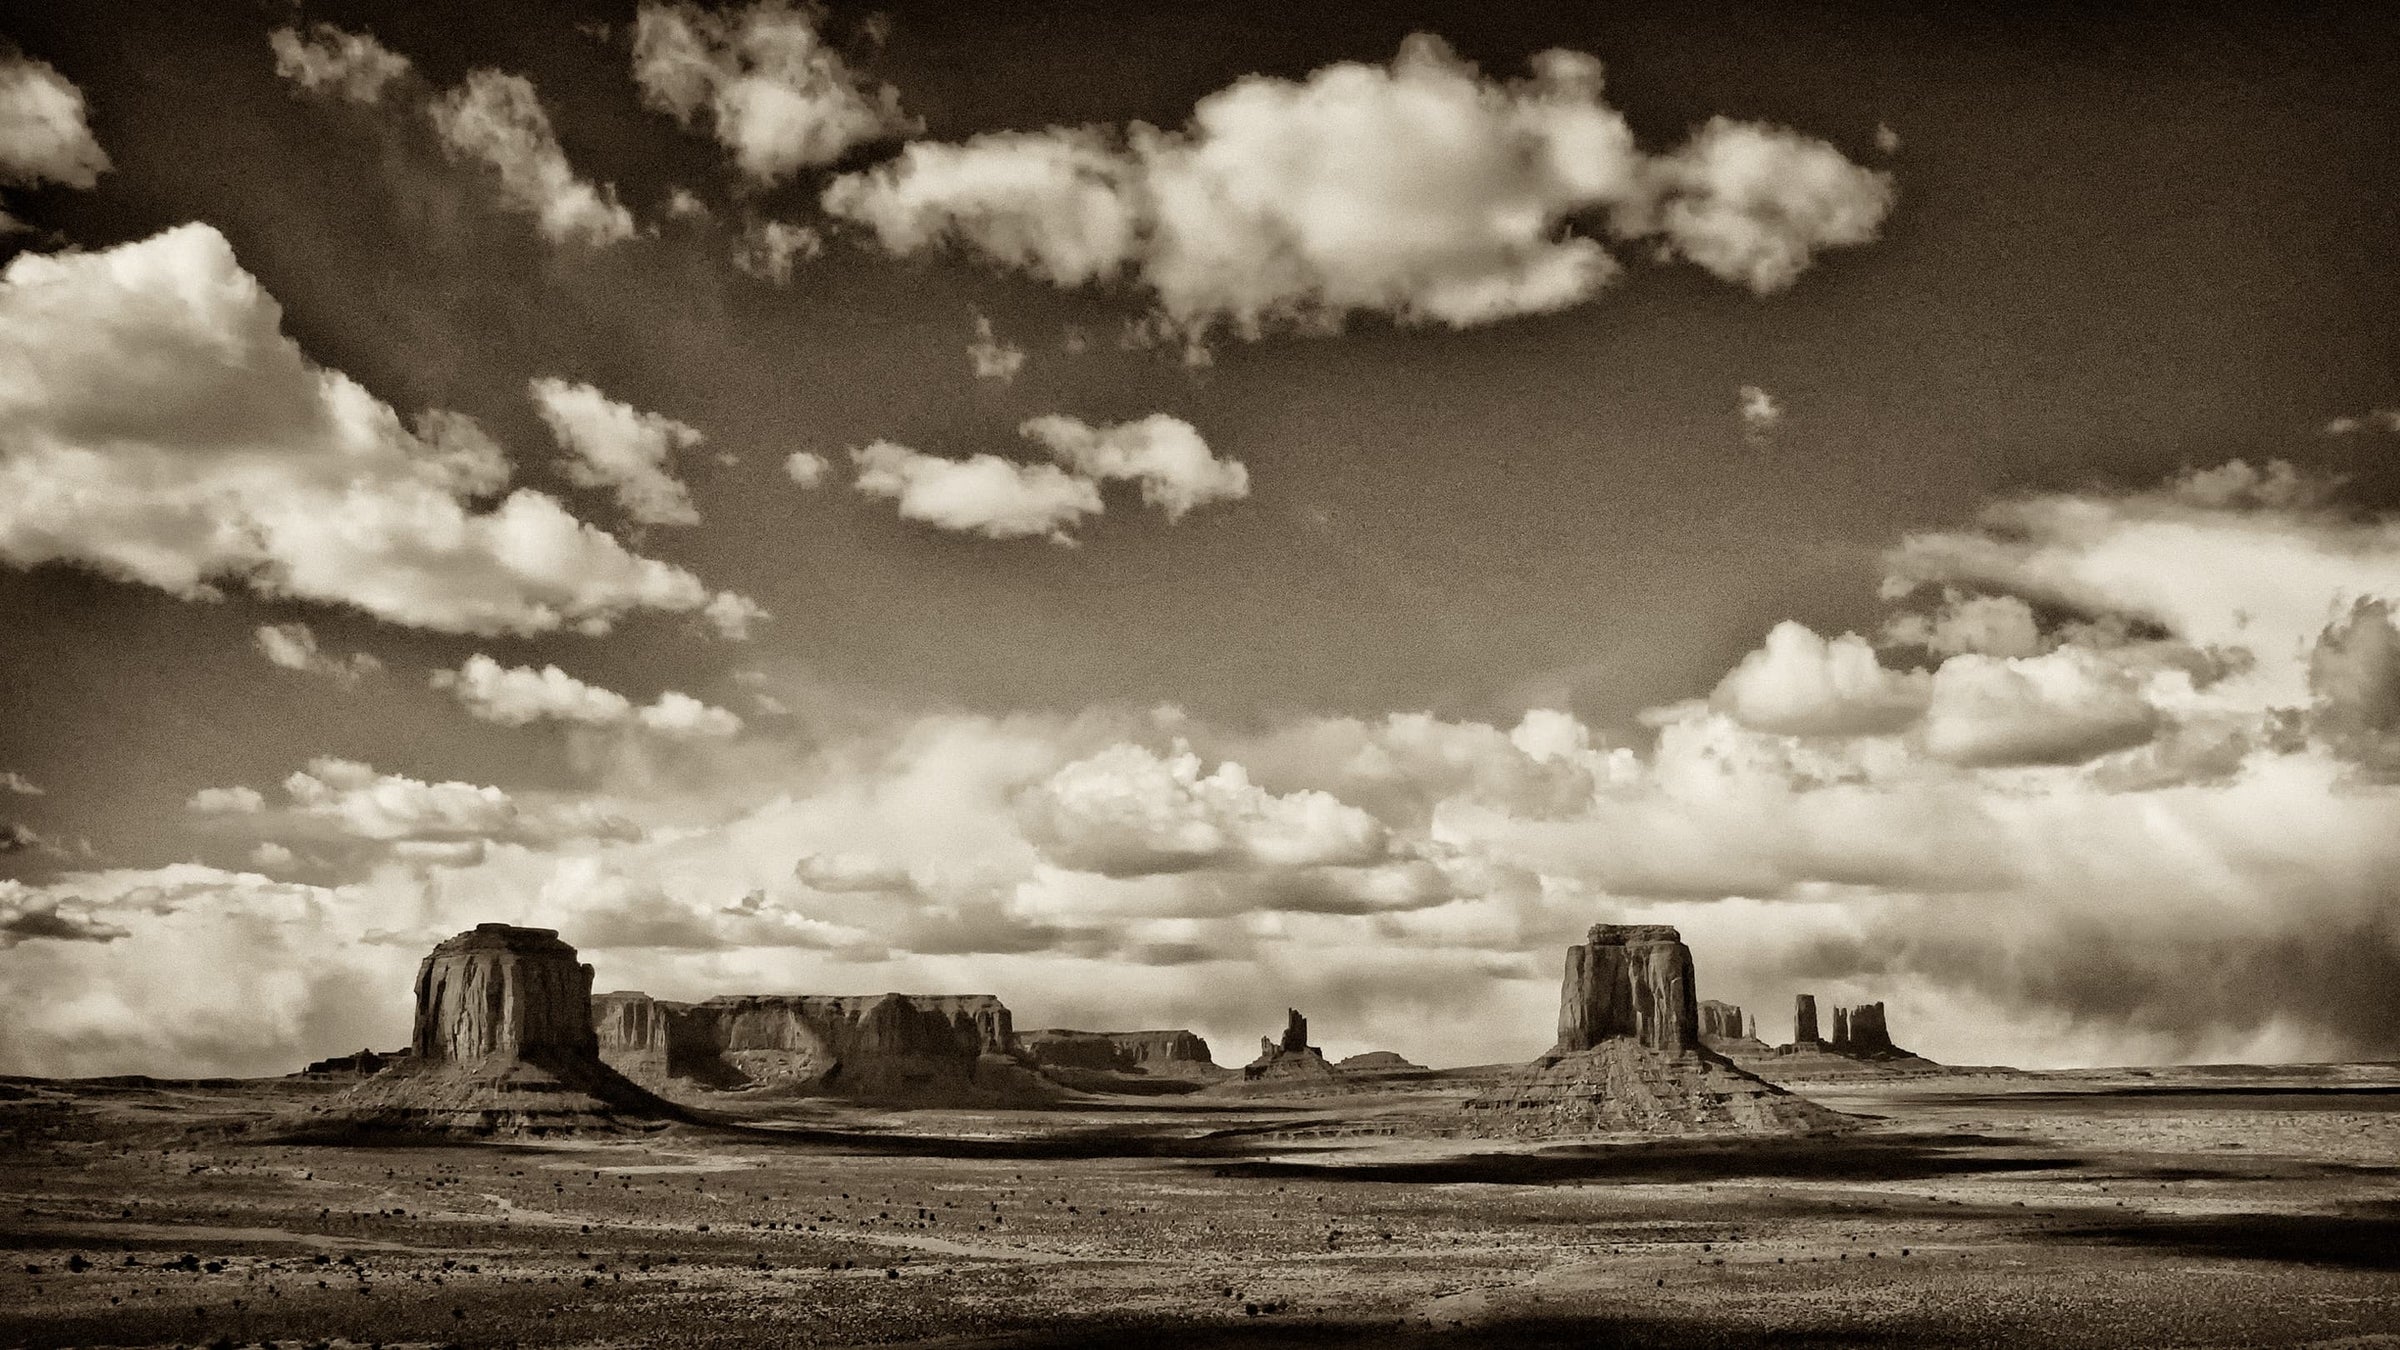 American Landscape and the Southwest